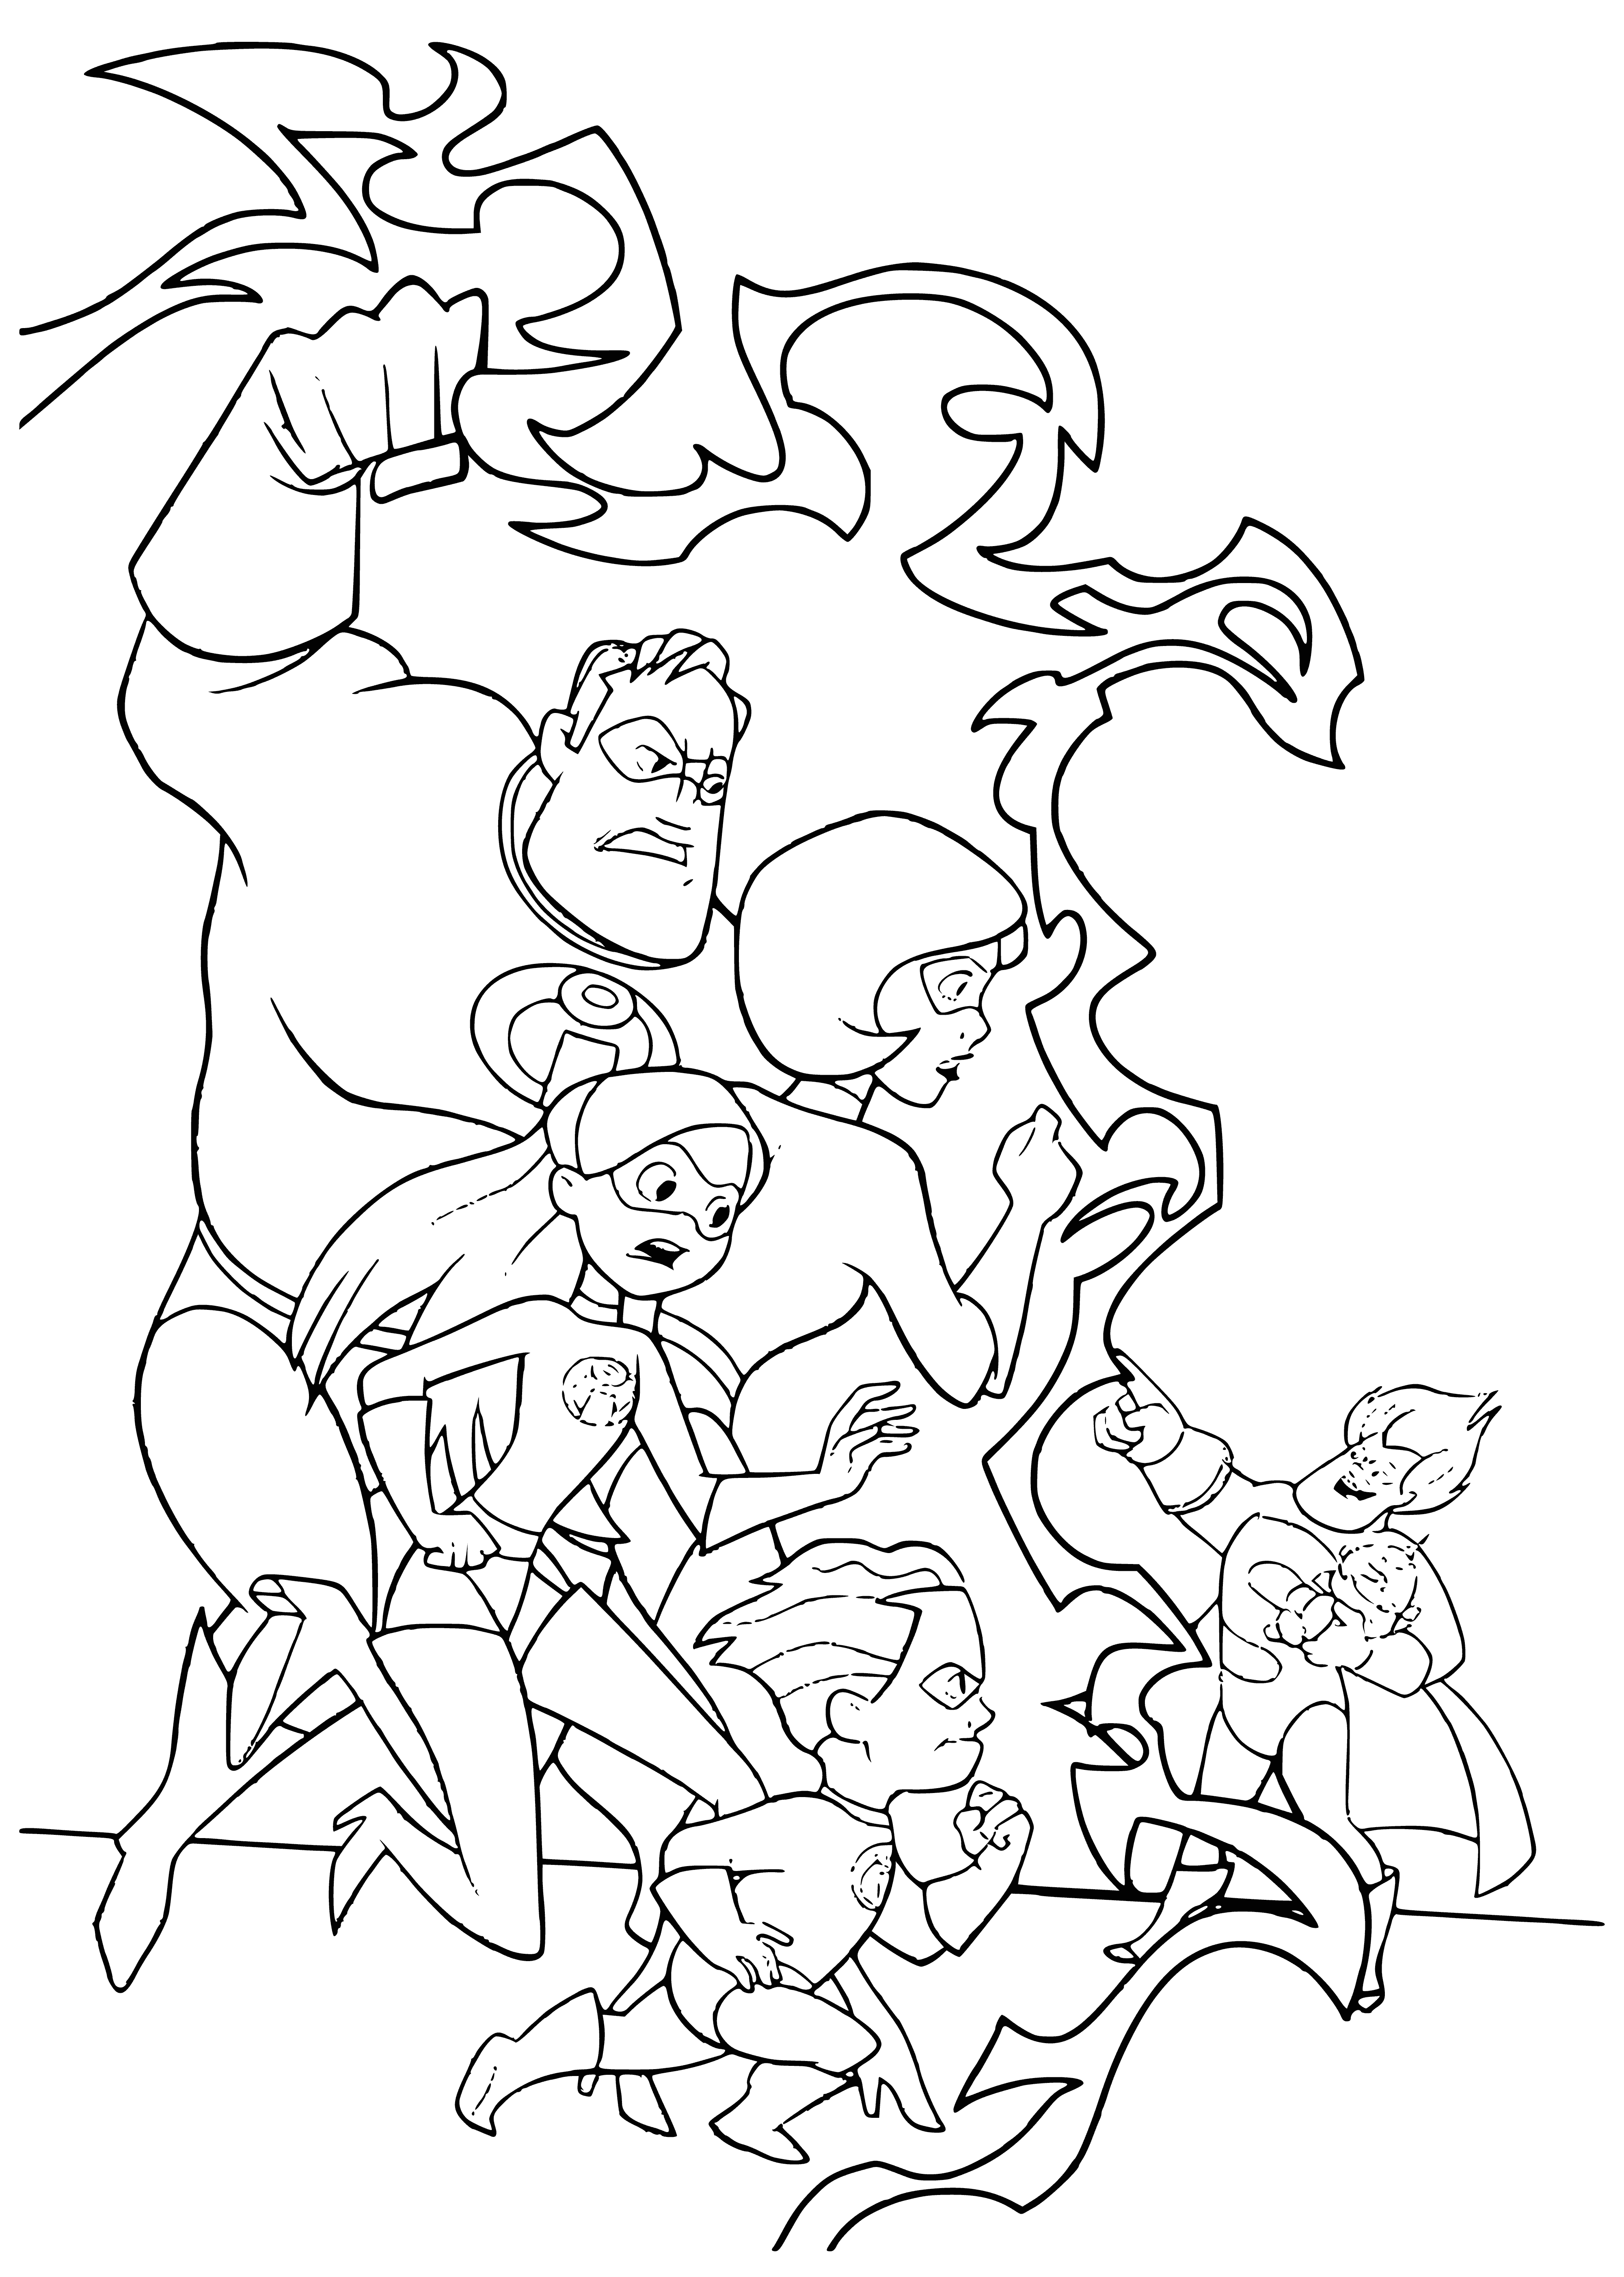 coloring page: The Incredibles battle Syndrome, a muscular man in a black suit & red cape. He flies & shoots lasers; Incredibles dodge & shoot back.